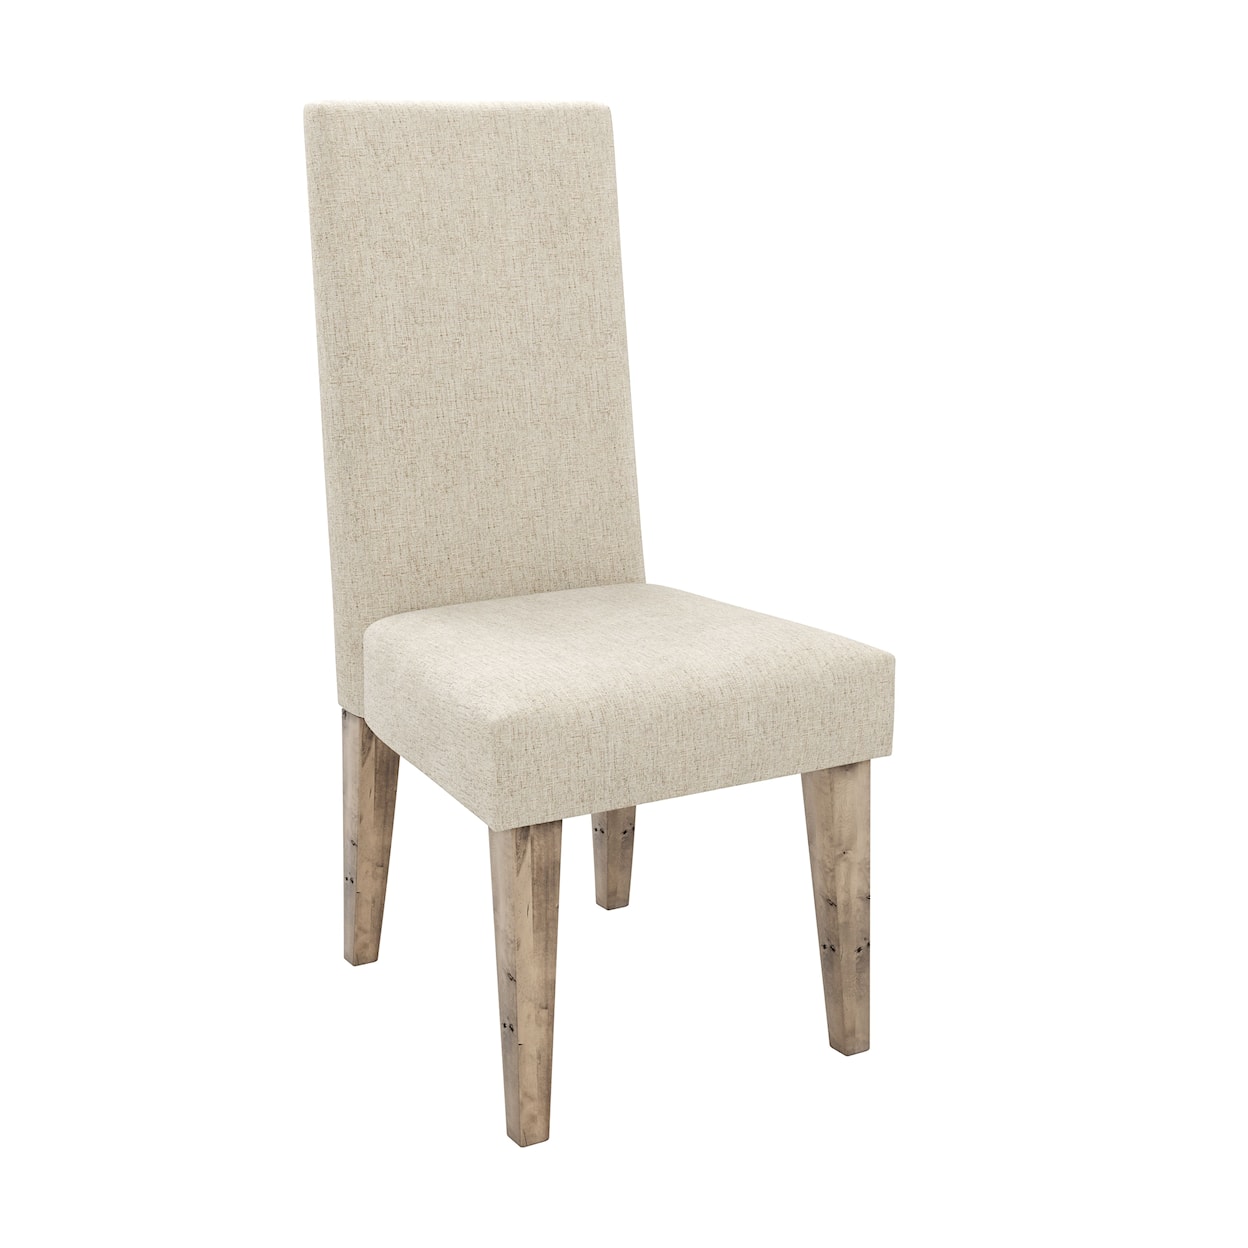 Canadel East Side Upholstered Dining Side Chair